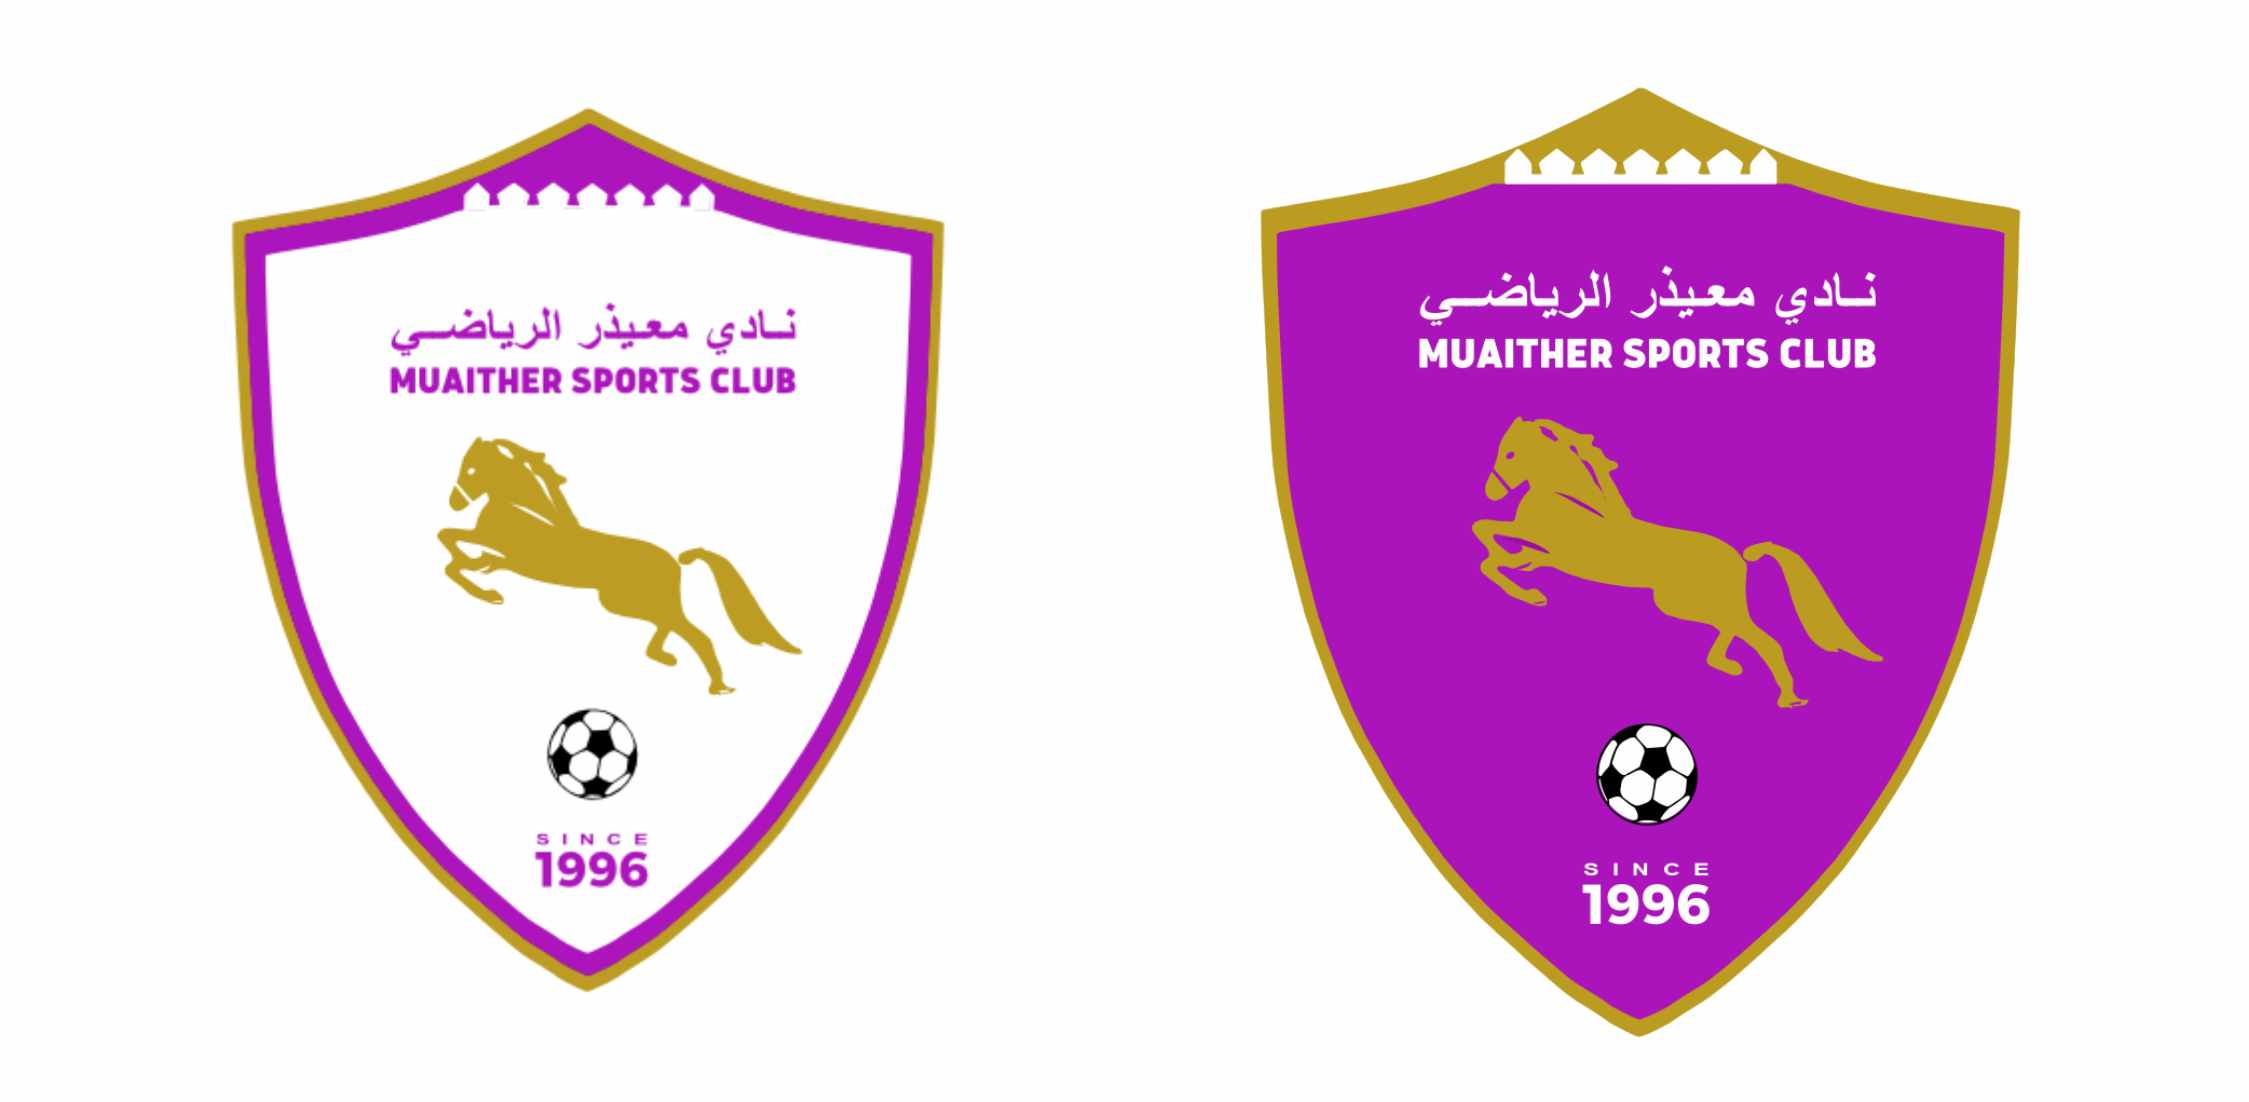 Muaither Club launches its new logo